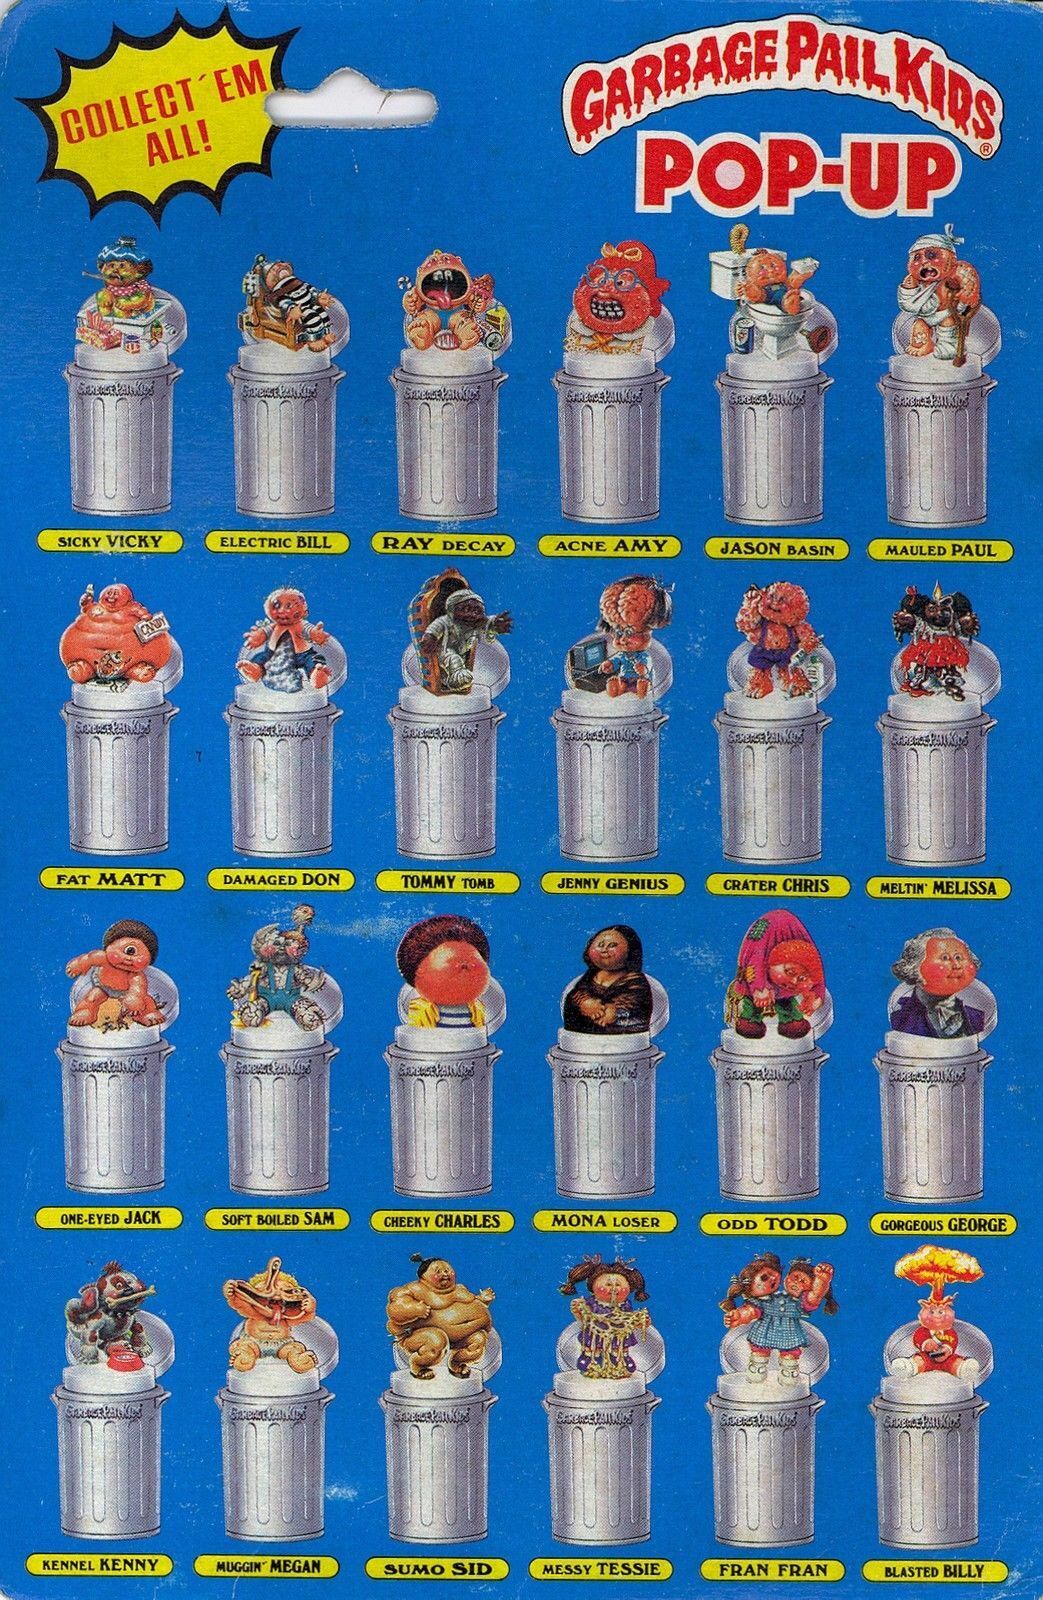 1985 Topps Imperial Toys GARBAGE PAIL KIDS KENNEL KENNY Pop-Up GPK Image 2